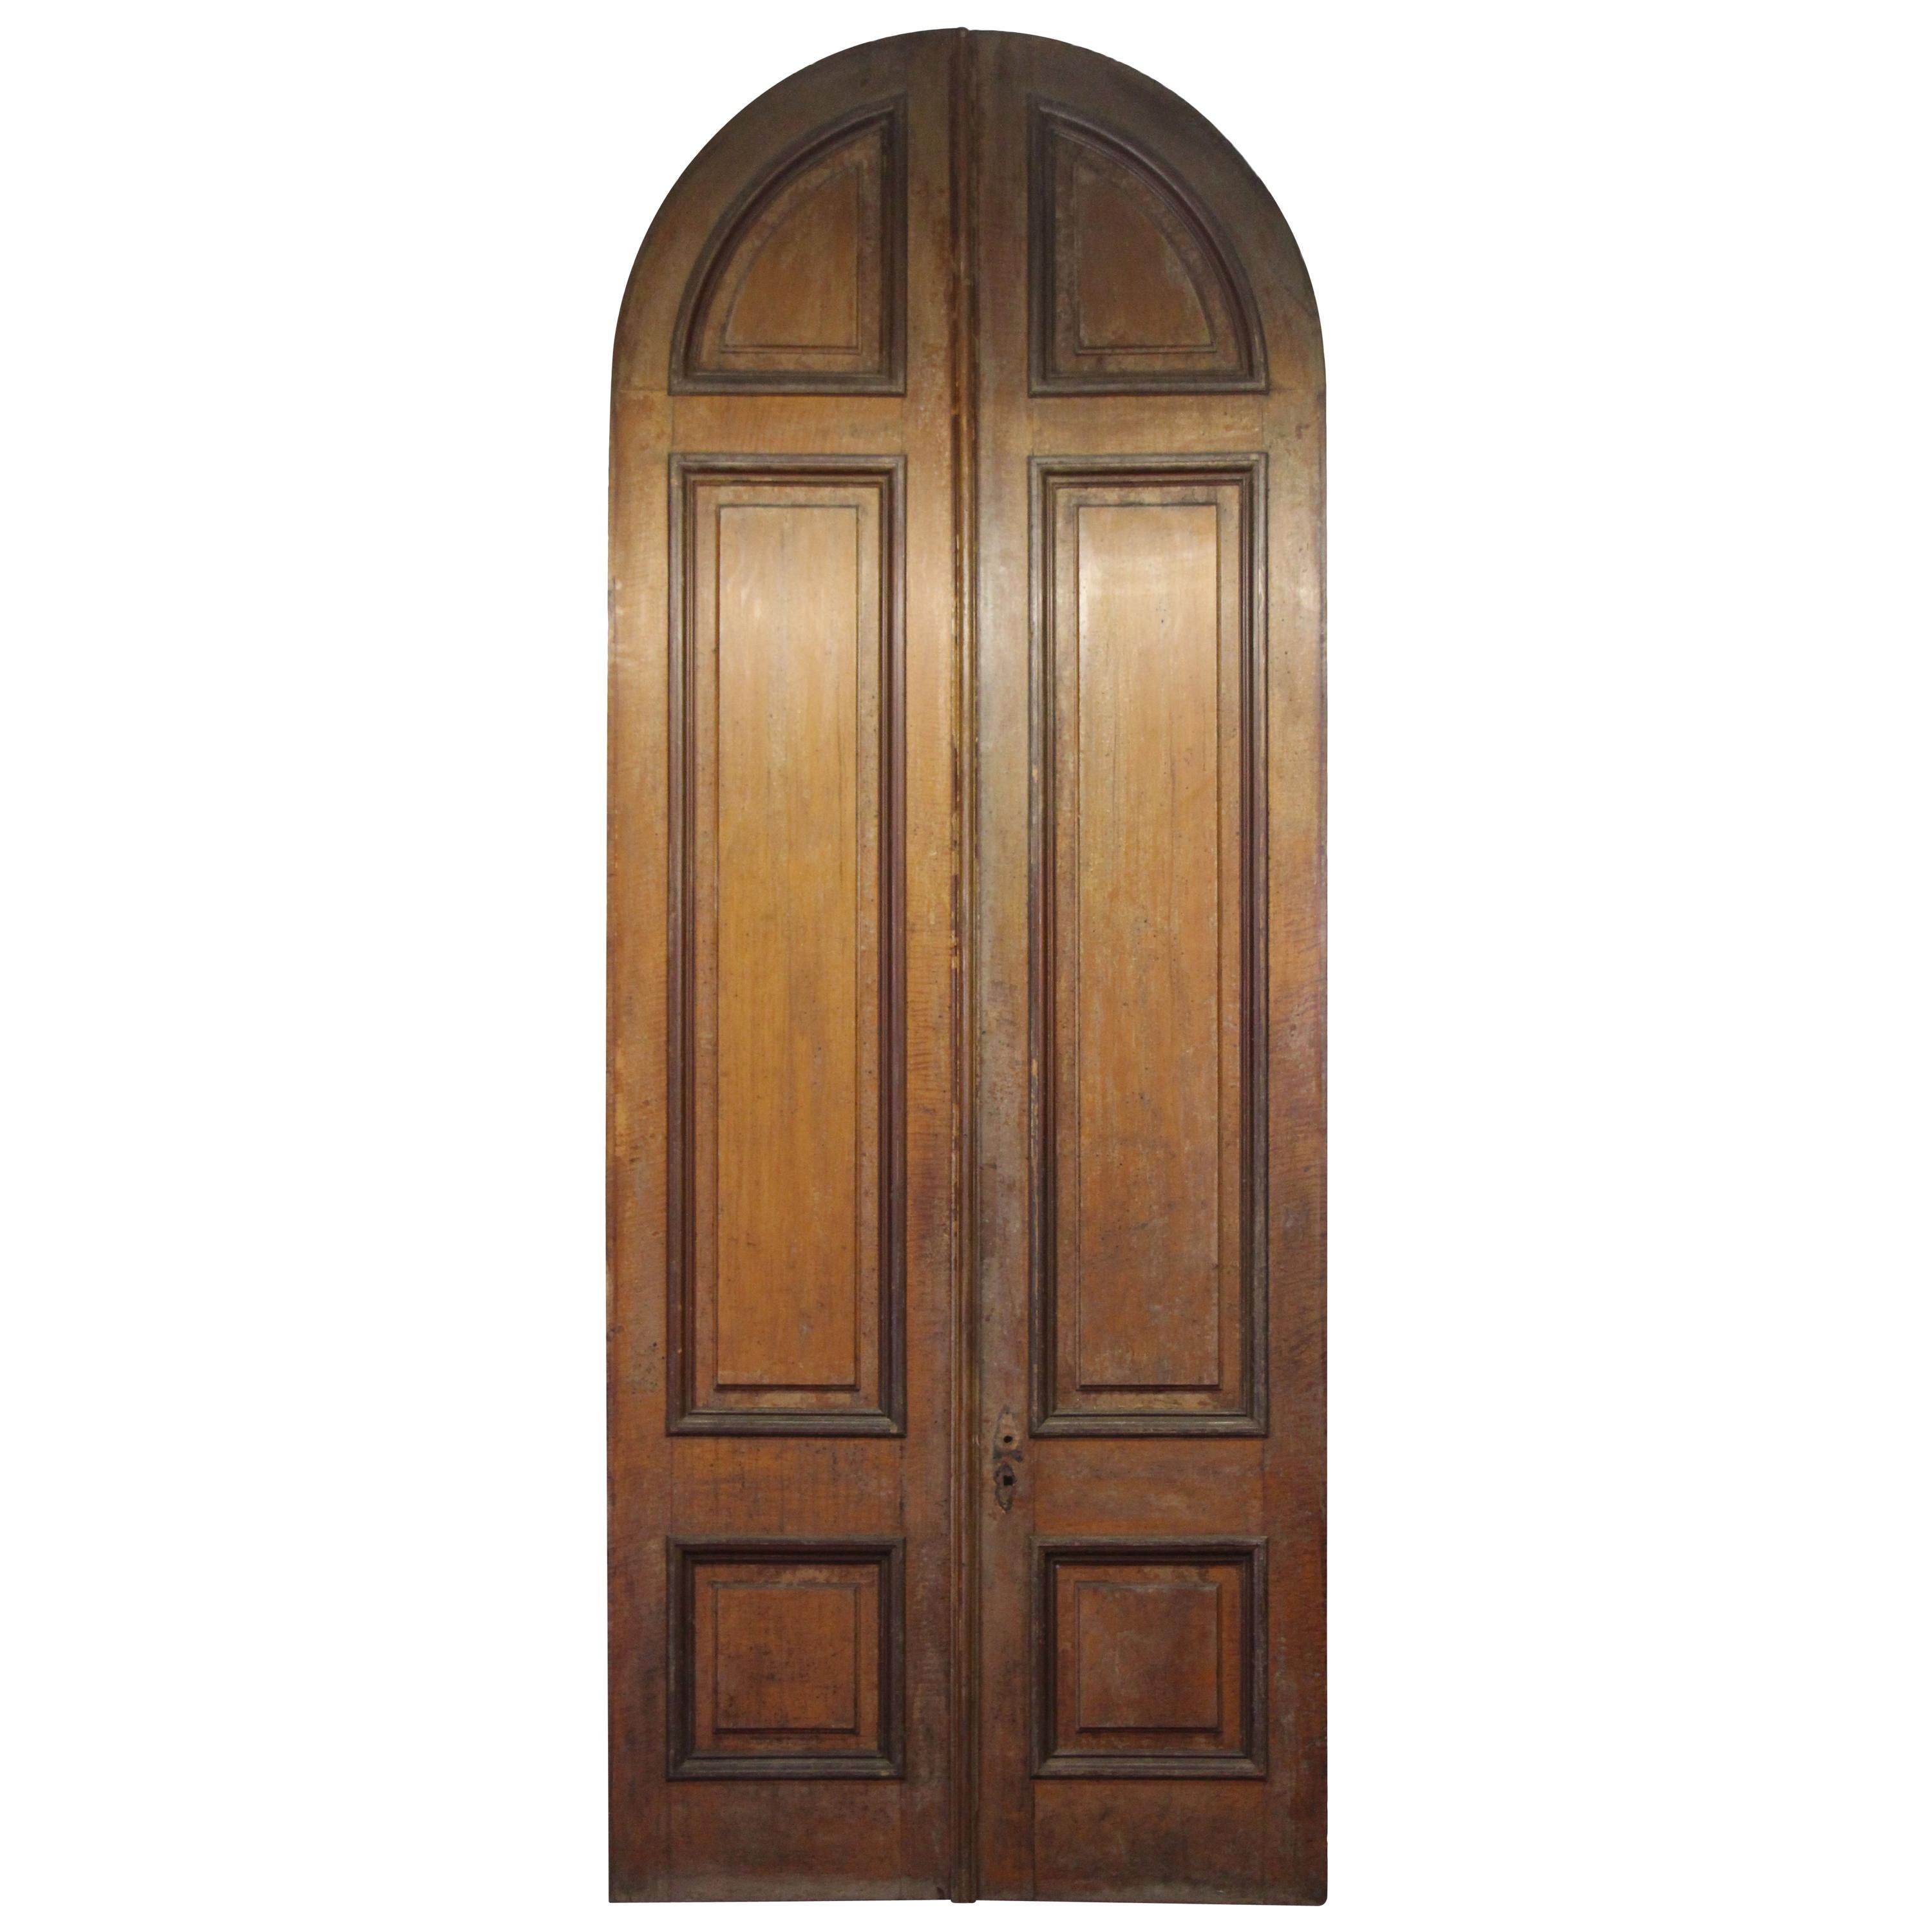 1876 Pair Oversize Raised Panel Arched Entry Double Doors from New Jersey